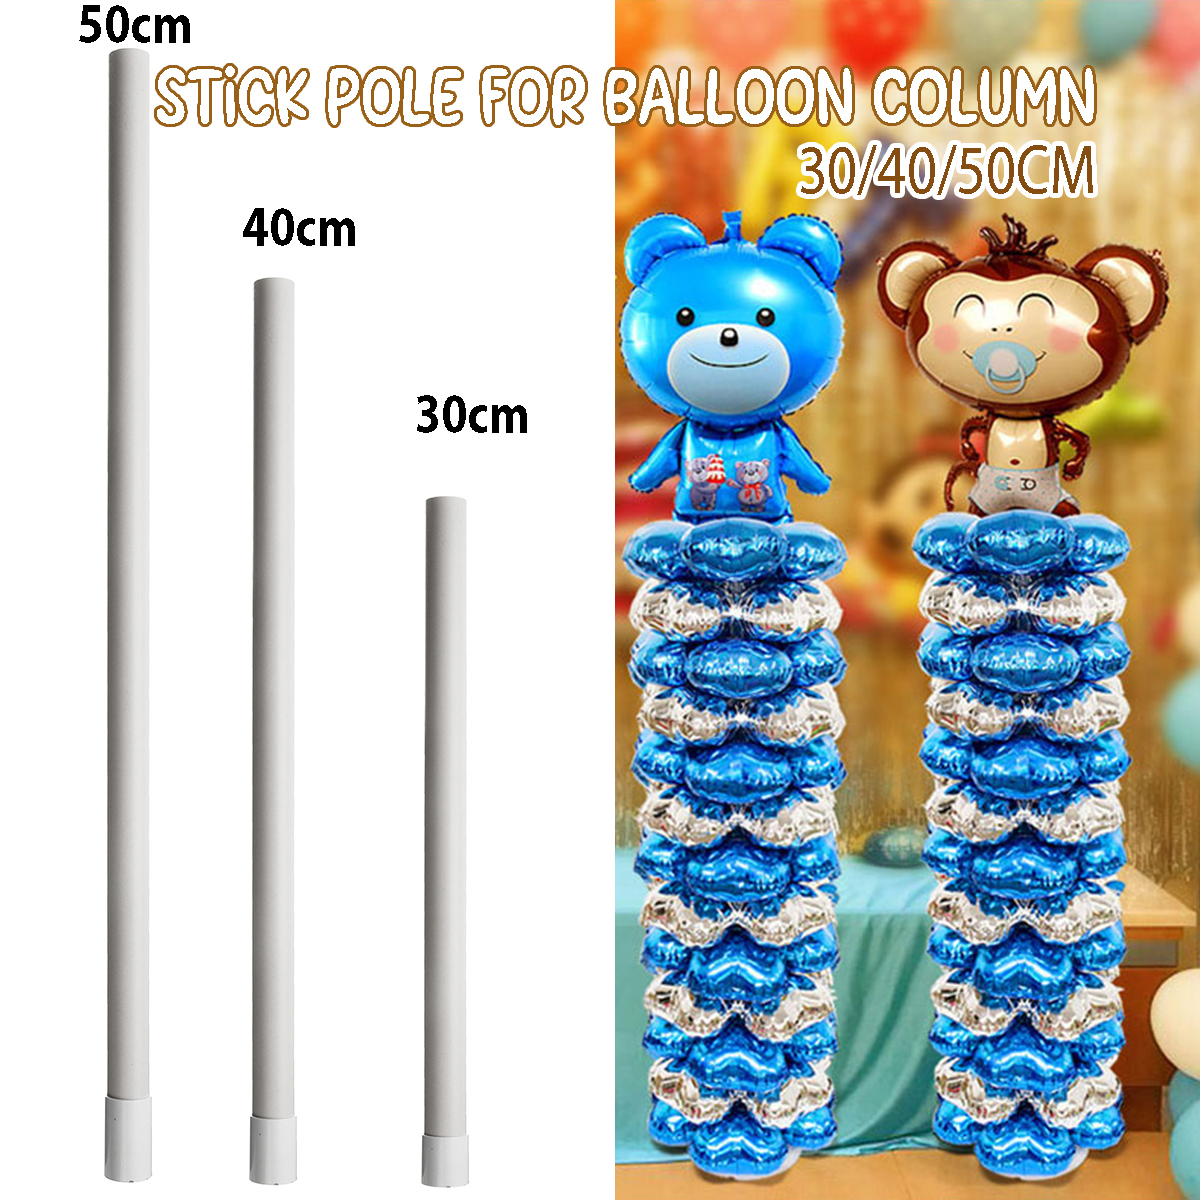 Plastic-Pole-Sticks-for-Arch-Column-Balloons-Base-Stand-Wedding-Party-Decorations-1558232-1